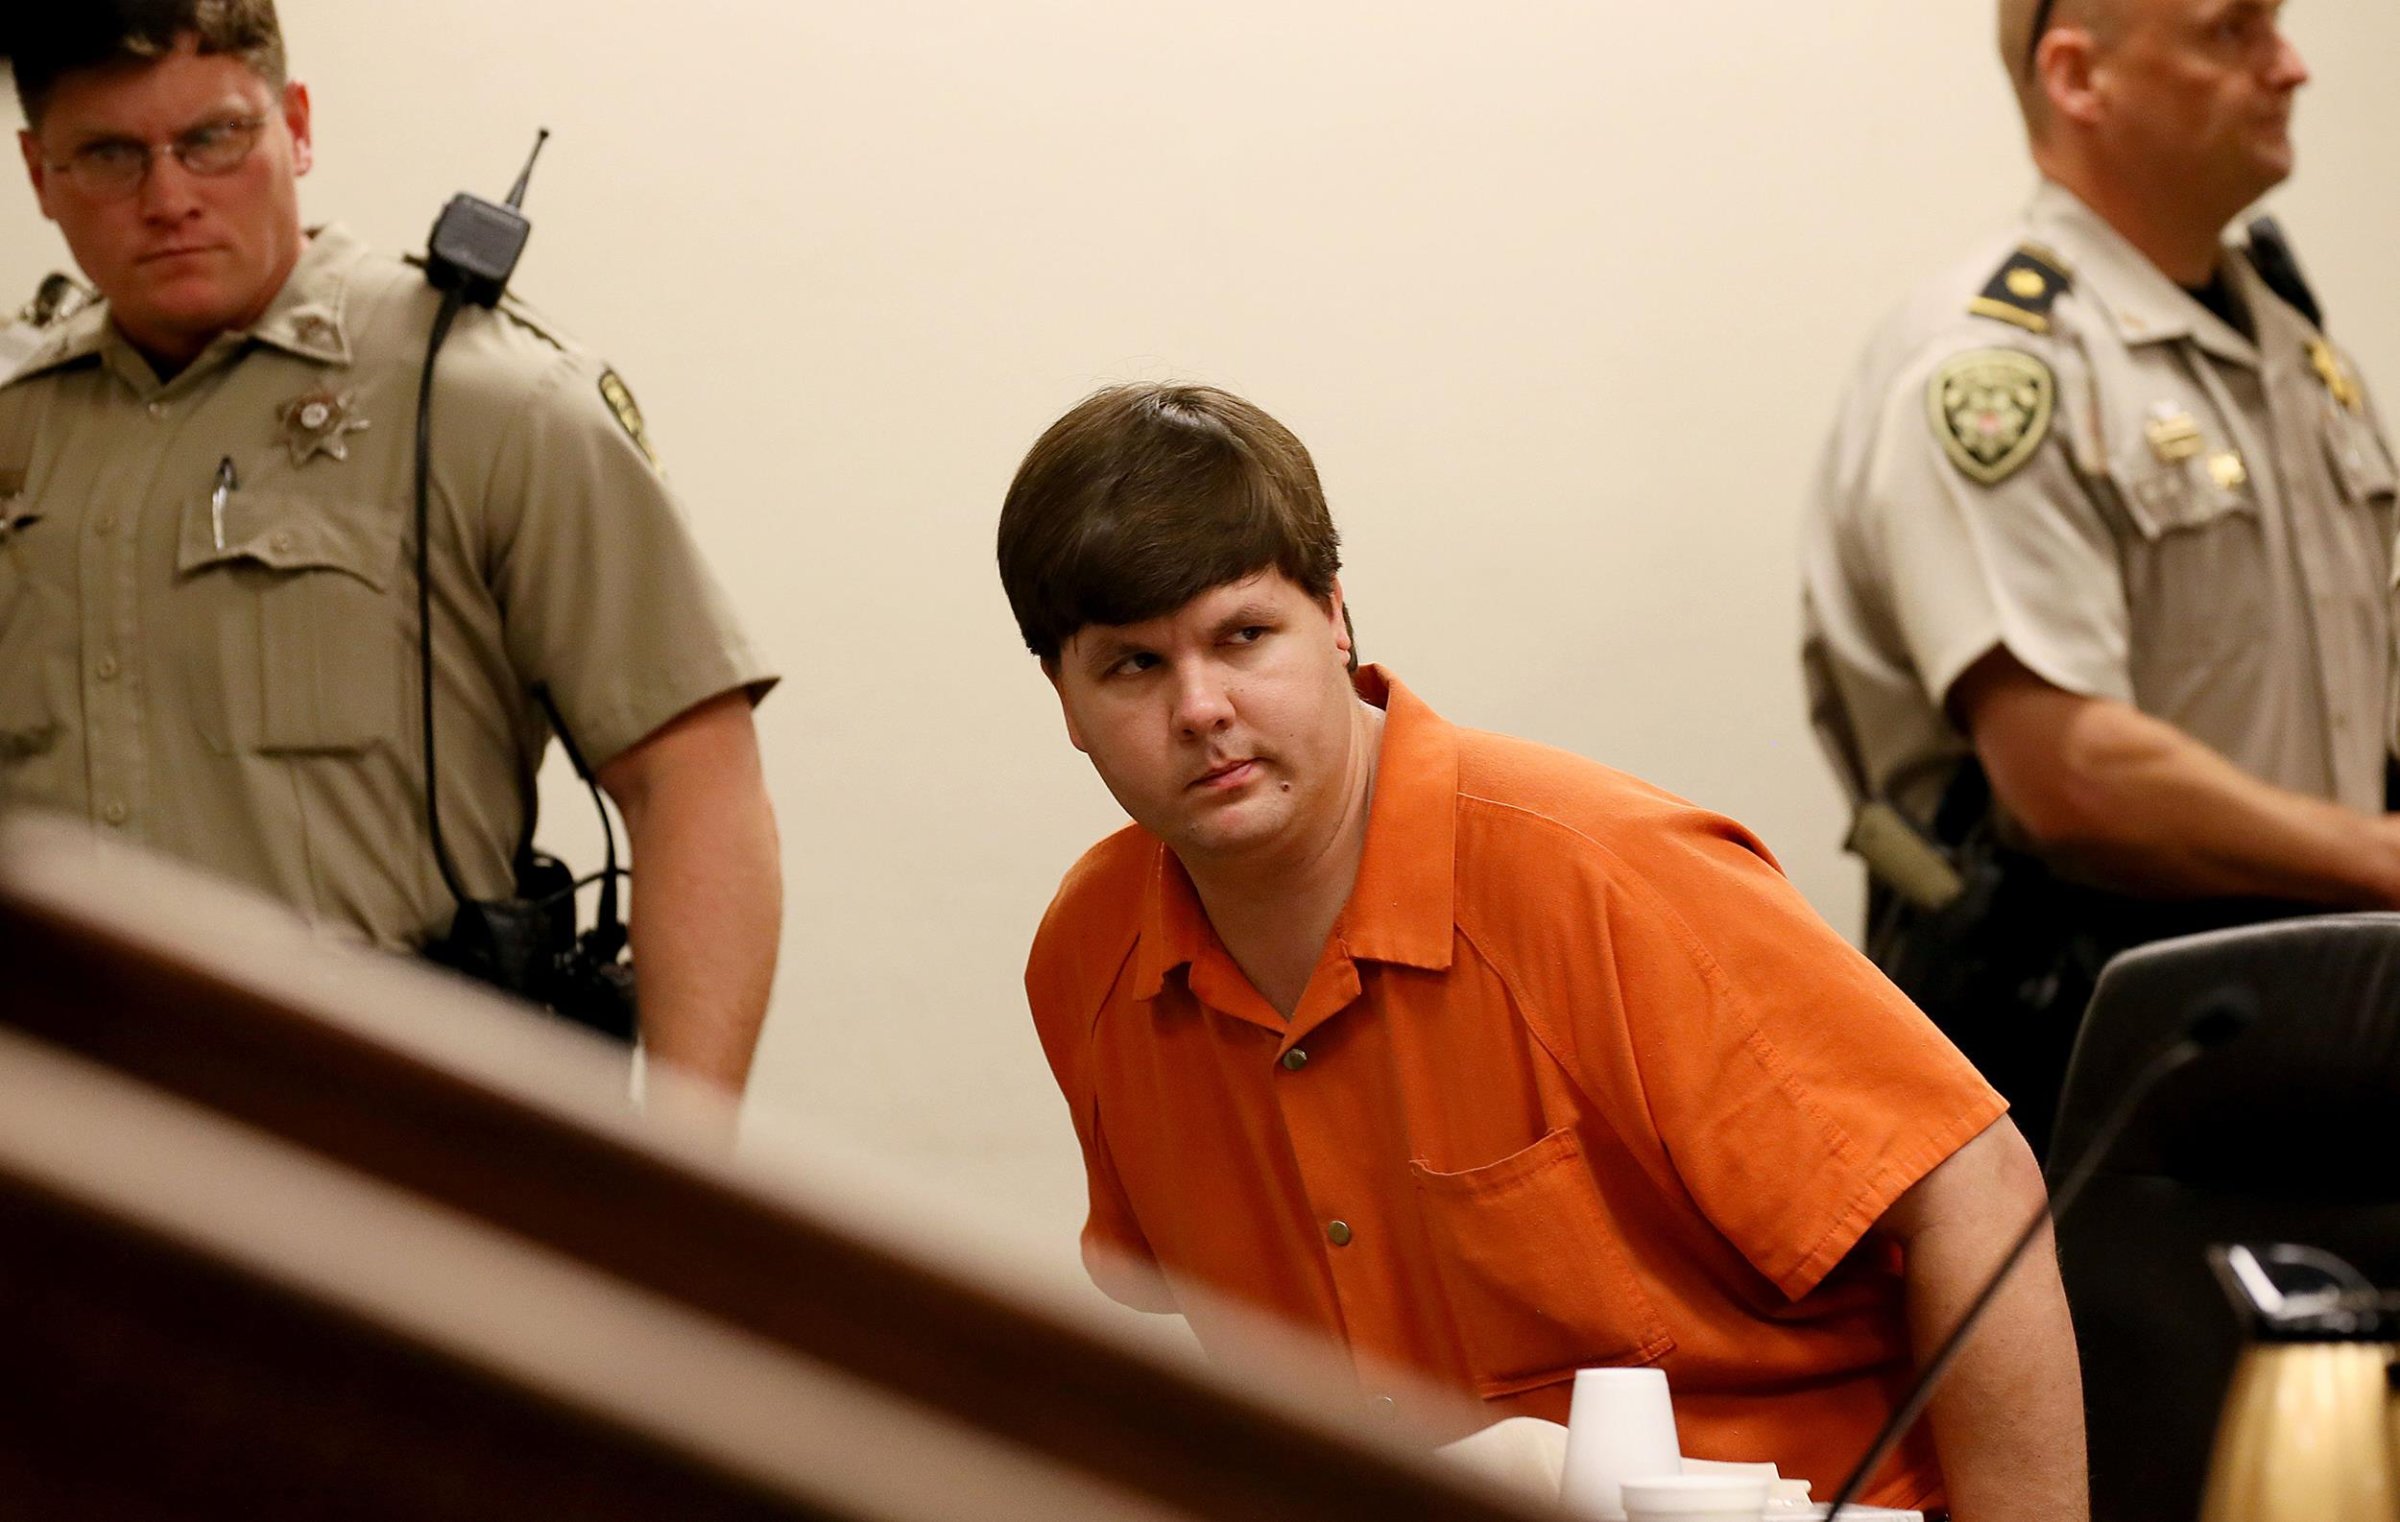 Justin Ross Harris, the father of a toddler who died after police say he was left in a hot car for about seven hours, is escorted out of Cobb County Magistrate Court after he was denied bond, Thursday, July 3, 2014, in Marietta, Ga.